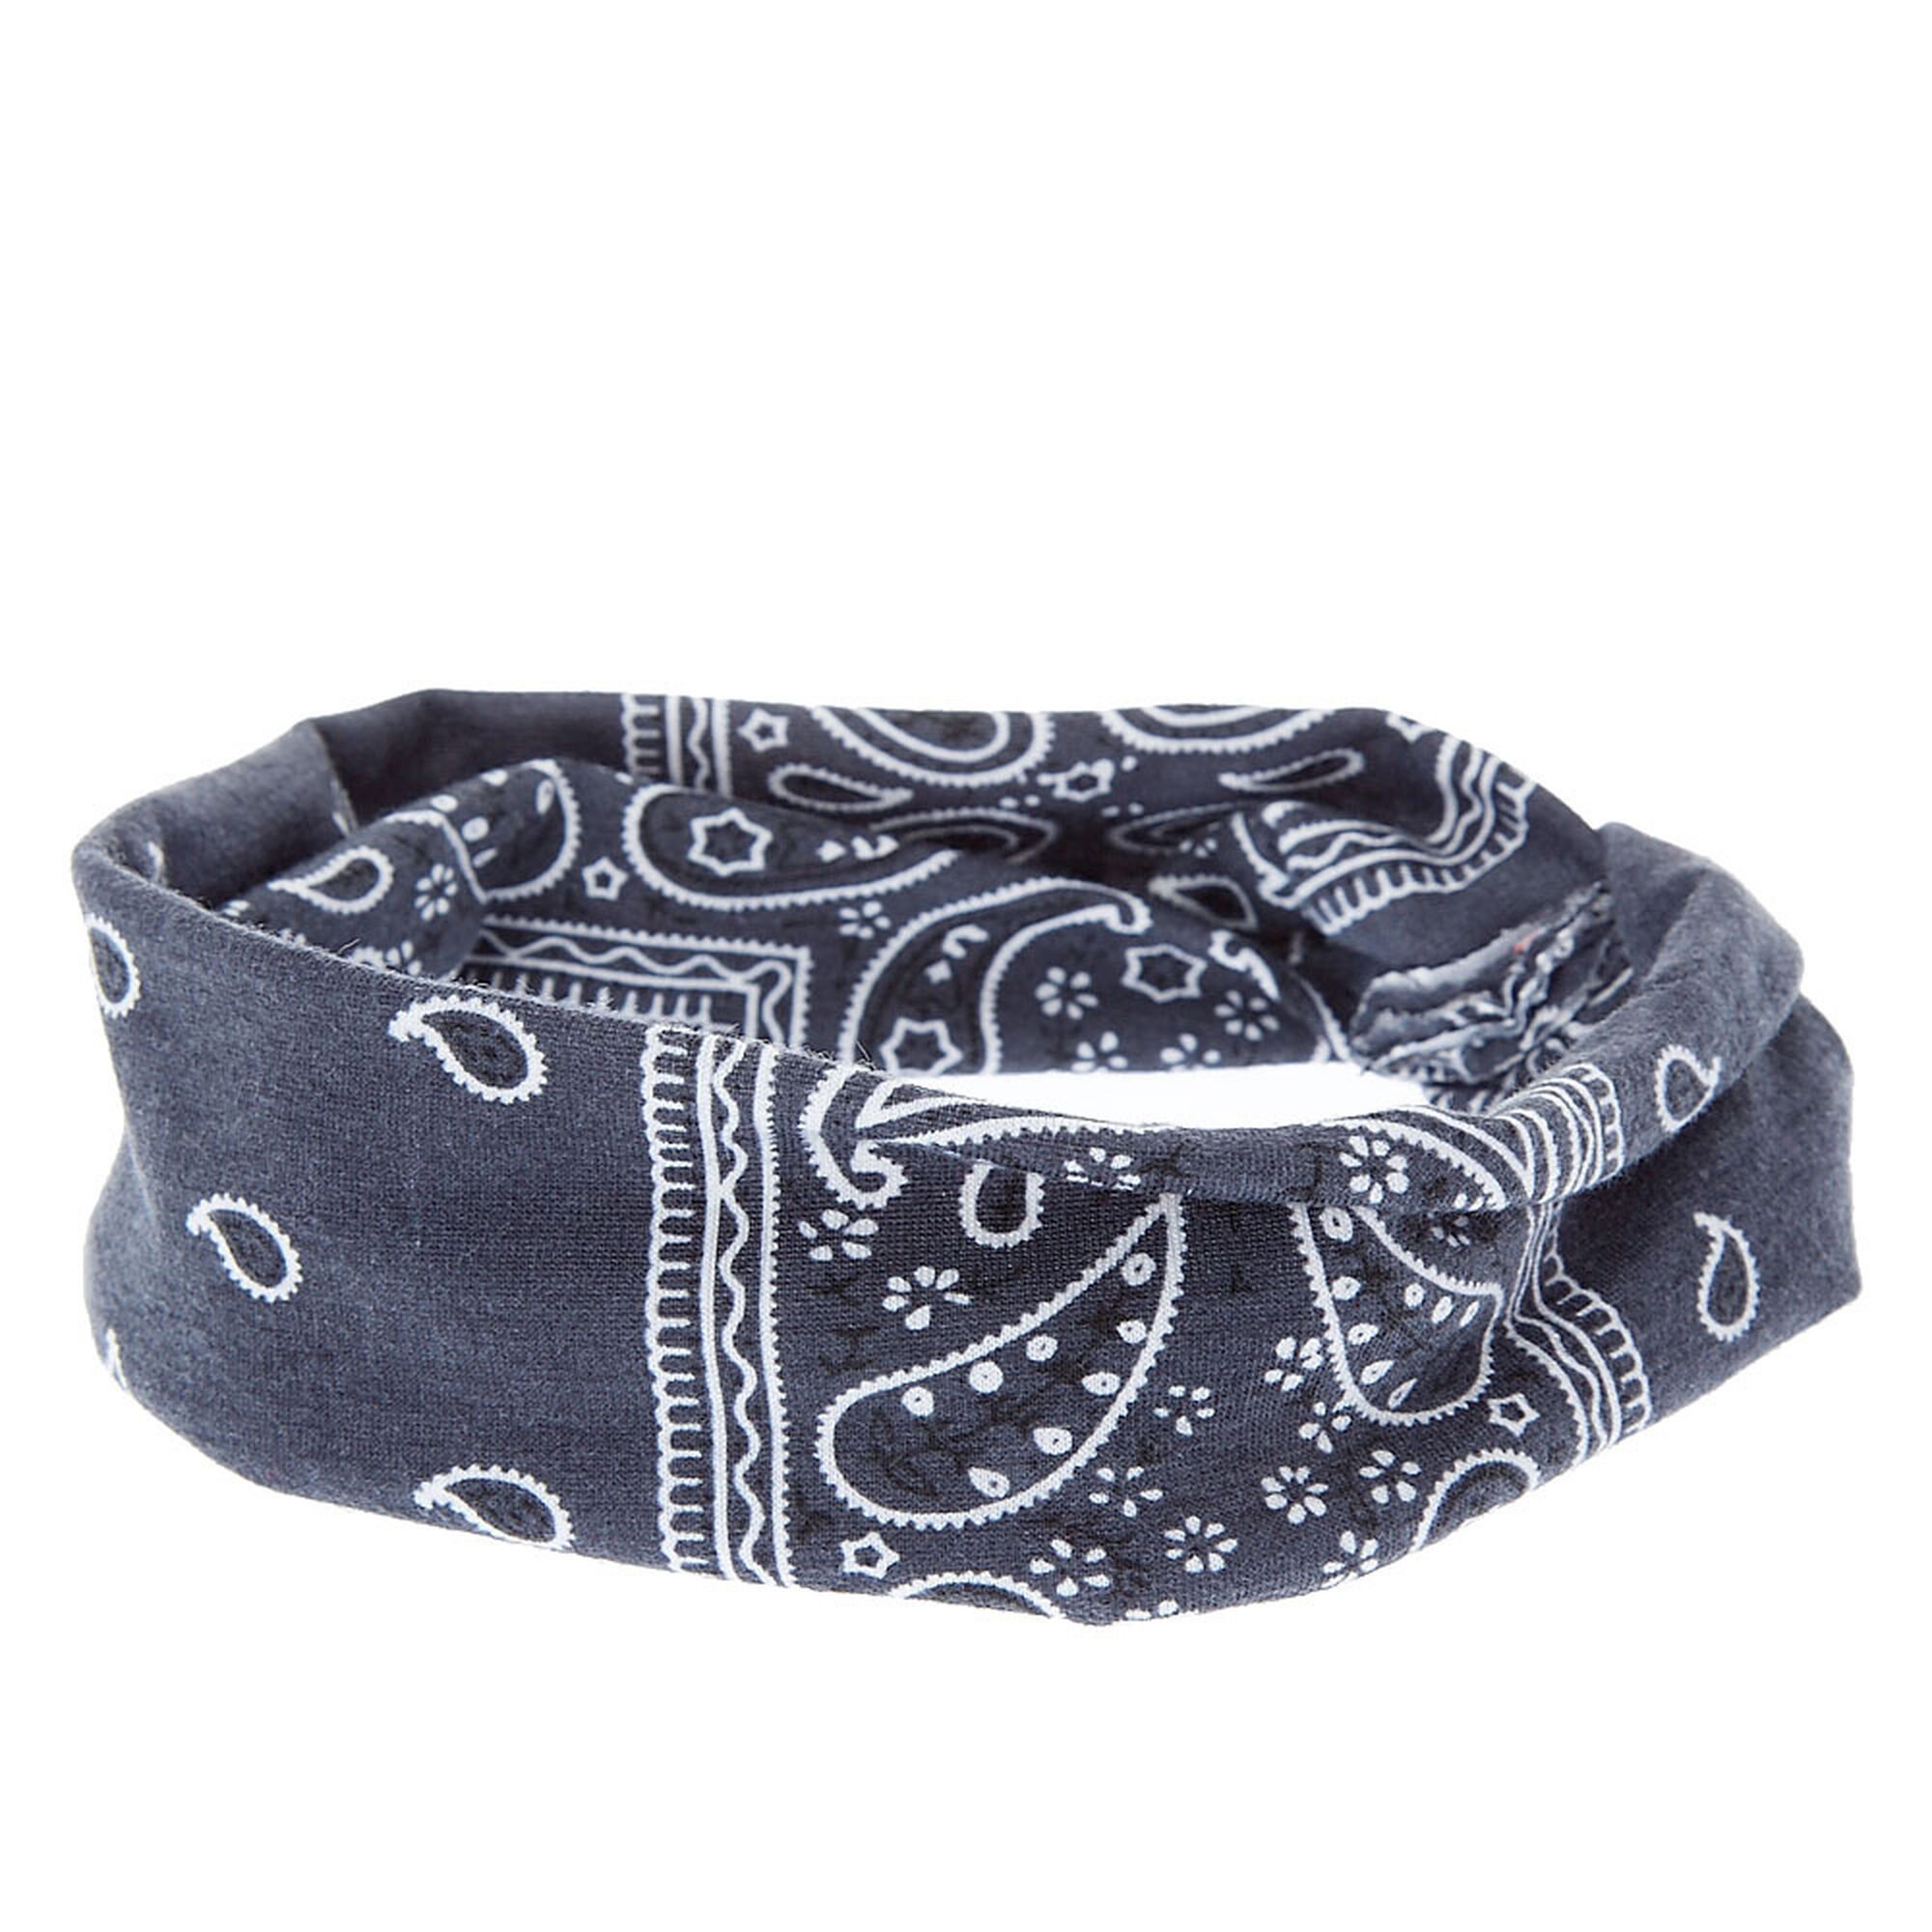 View Claires Bandana Twisted Headwrap Charcoal information